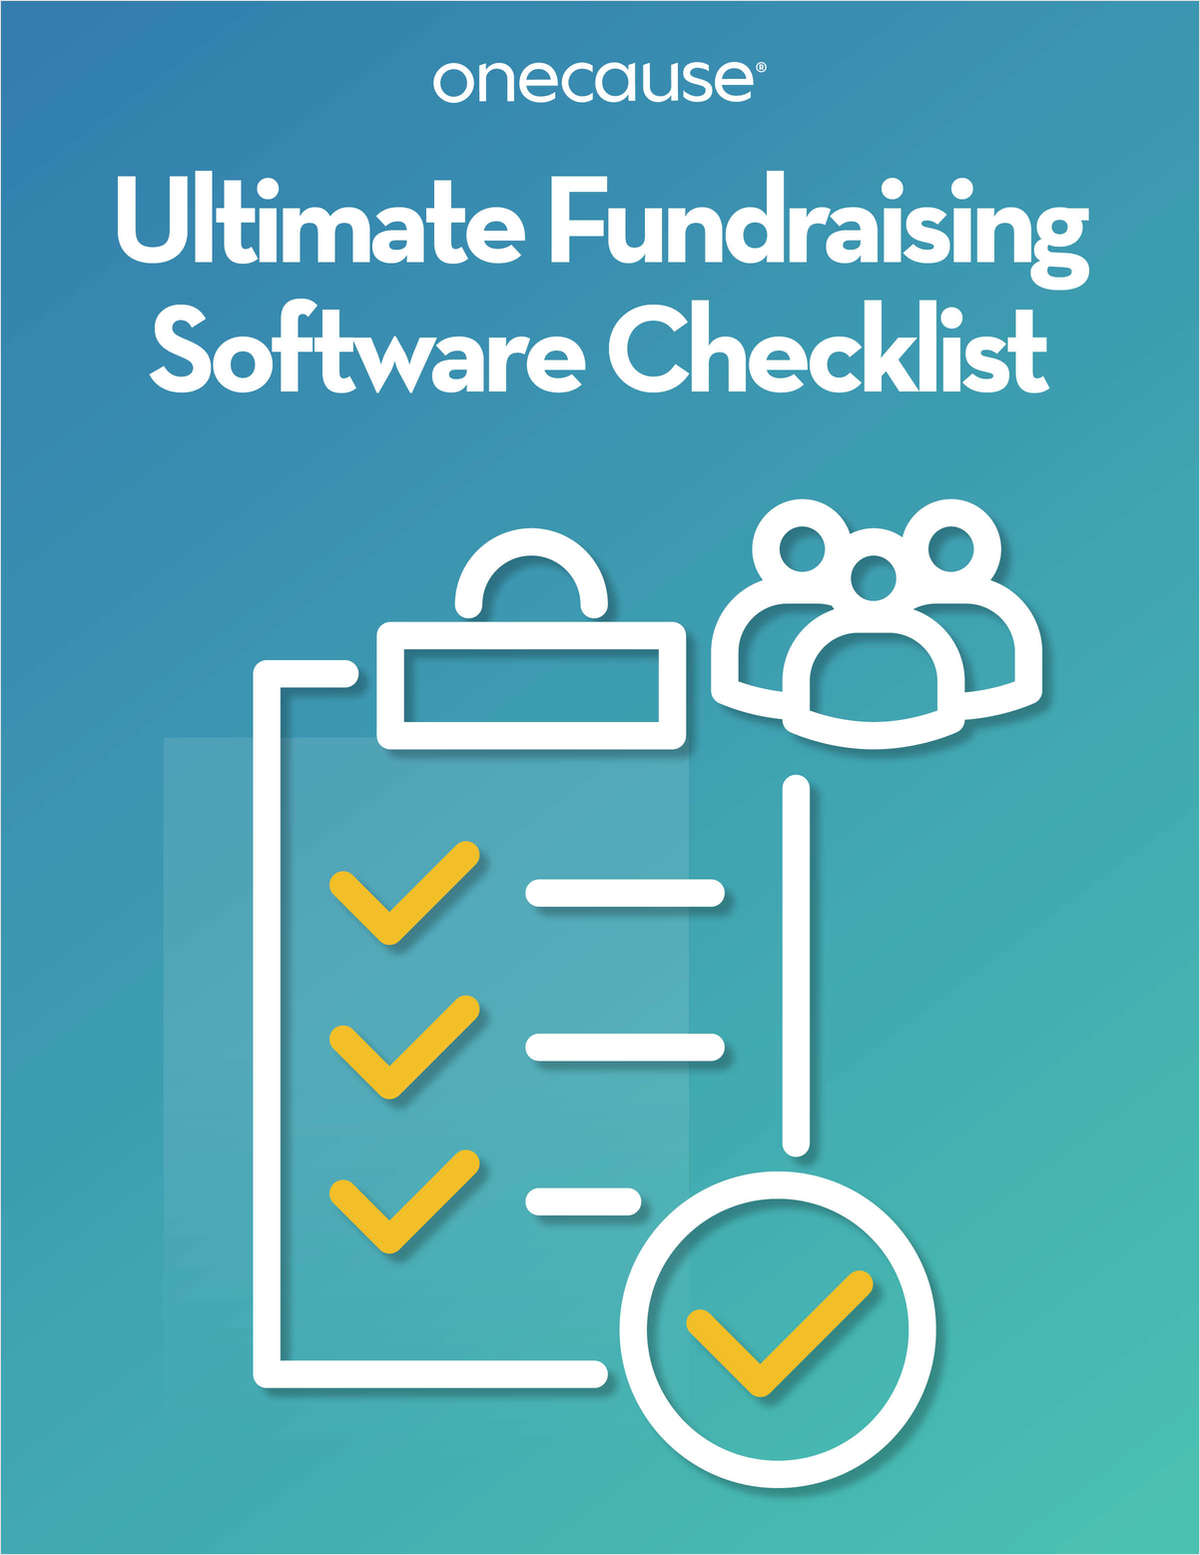 Ultimate Fundraising Software Checklist